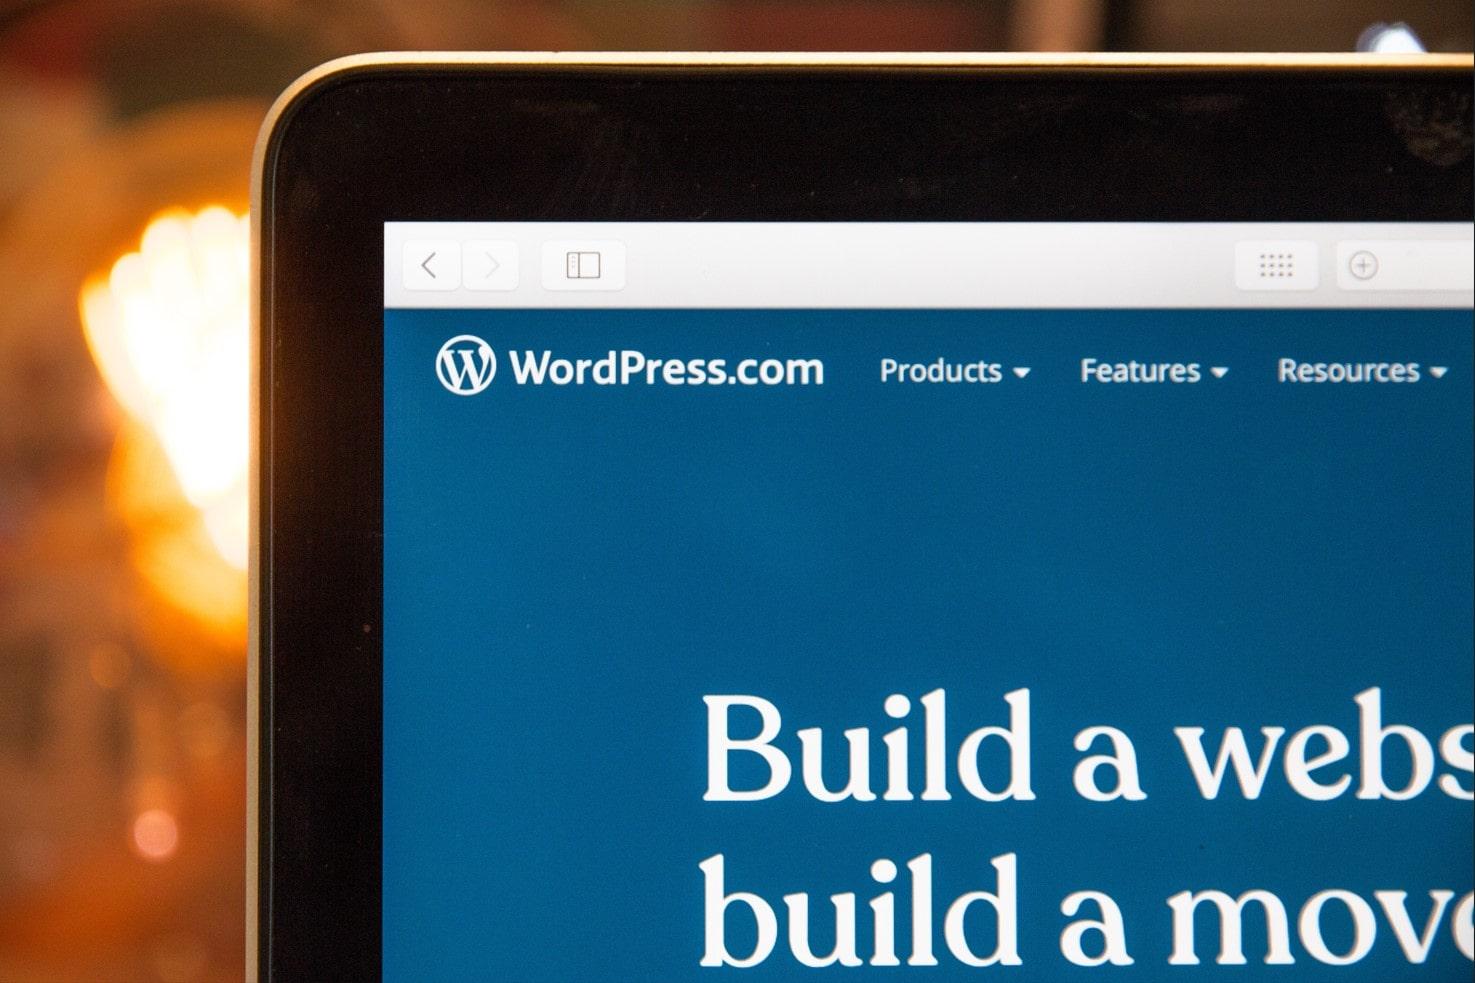 WordPress – CMS Which Runs 60% of Websites on the Internet